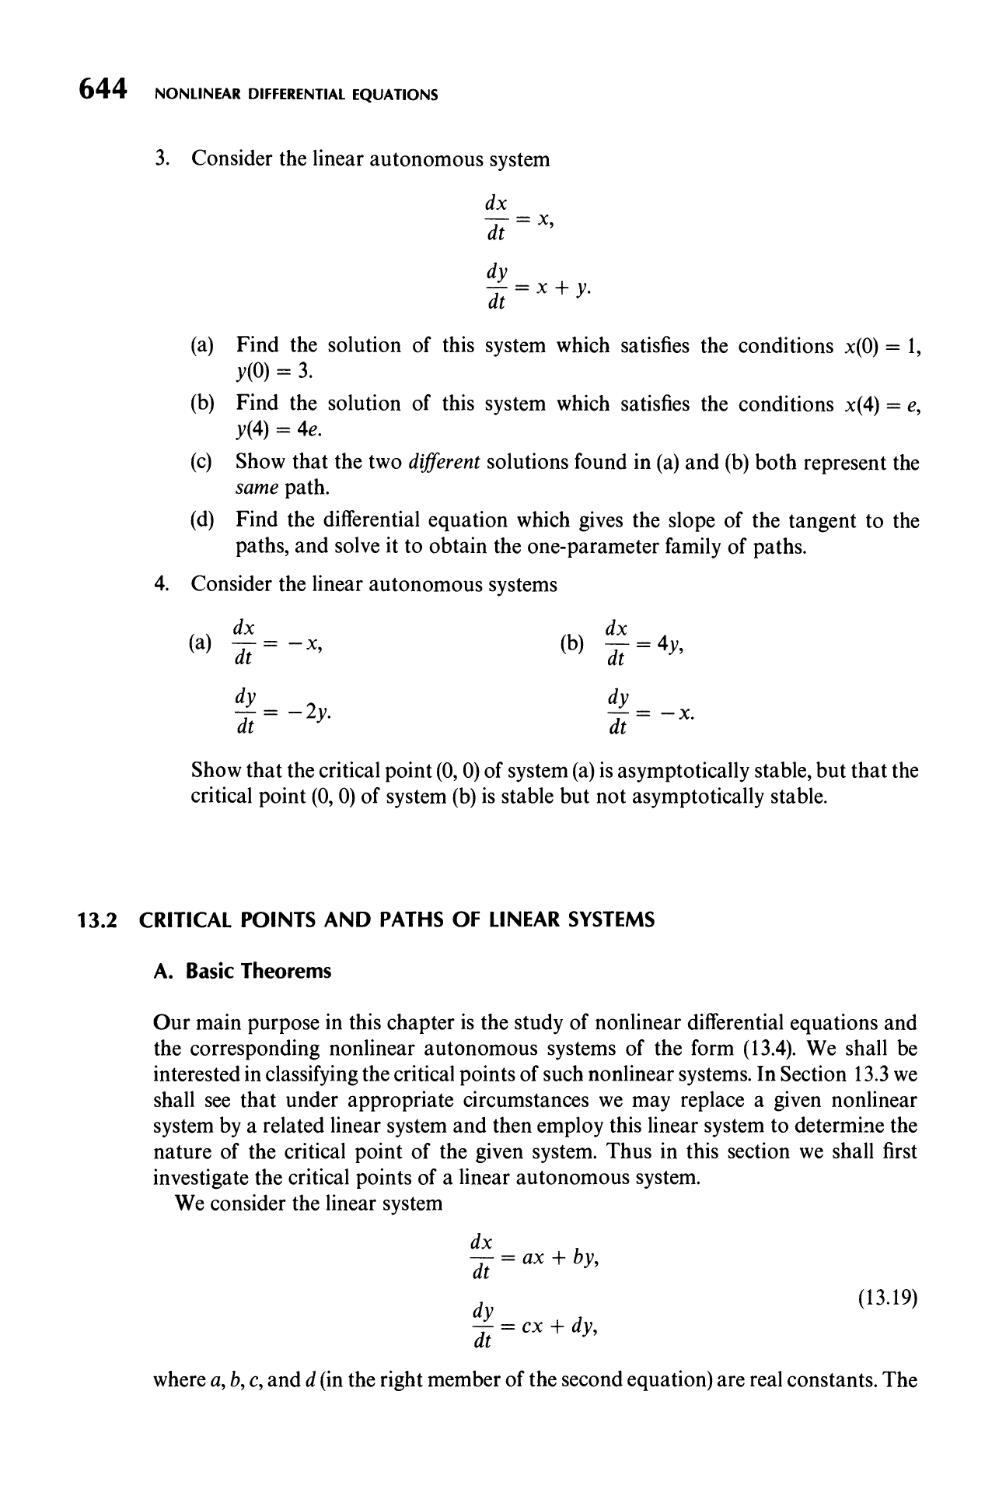 13.2  Critical Points and Paths of Linear Systems